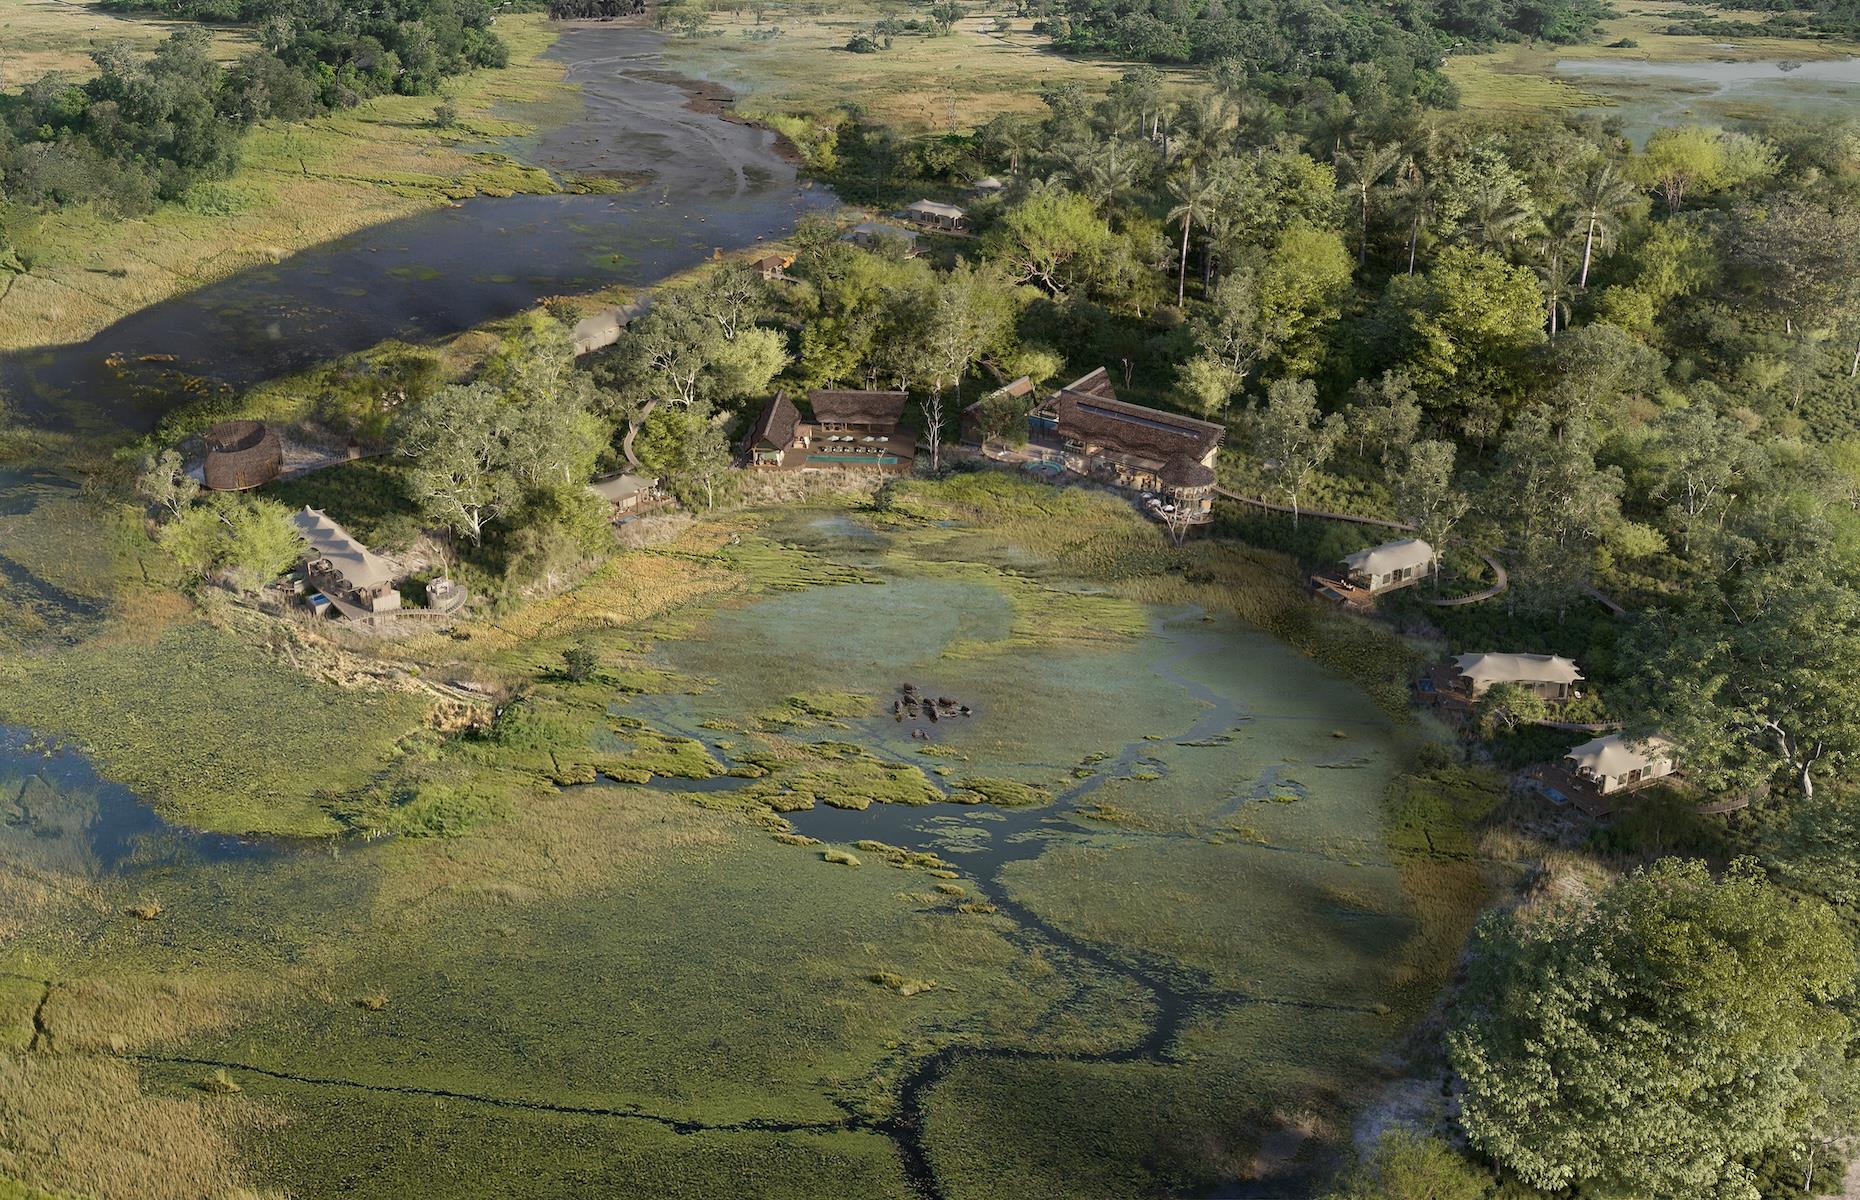 <p>Due to open in the wetland wilderness of the Okavango Delta in March, this 100% solar-powered safari camp has serious luxe and eco credentials. It will feature eight large safari tented suites, all with private plunge pools, indoor-outdoor showers and private decks, and two family suites. Along with 5-star facilities like a wine bar, spa and pool, Atzaro aims to connect guests with the land and community. It will have an African art gallery and Ancestral Boma, a central space that aims to share the history of the area and the tribes and peoples that lived here.</p>